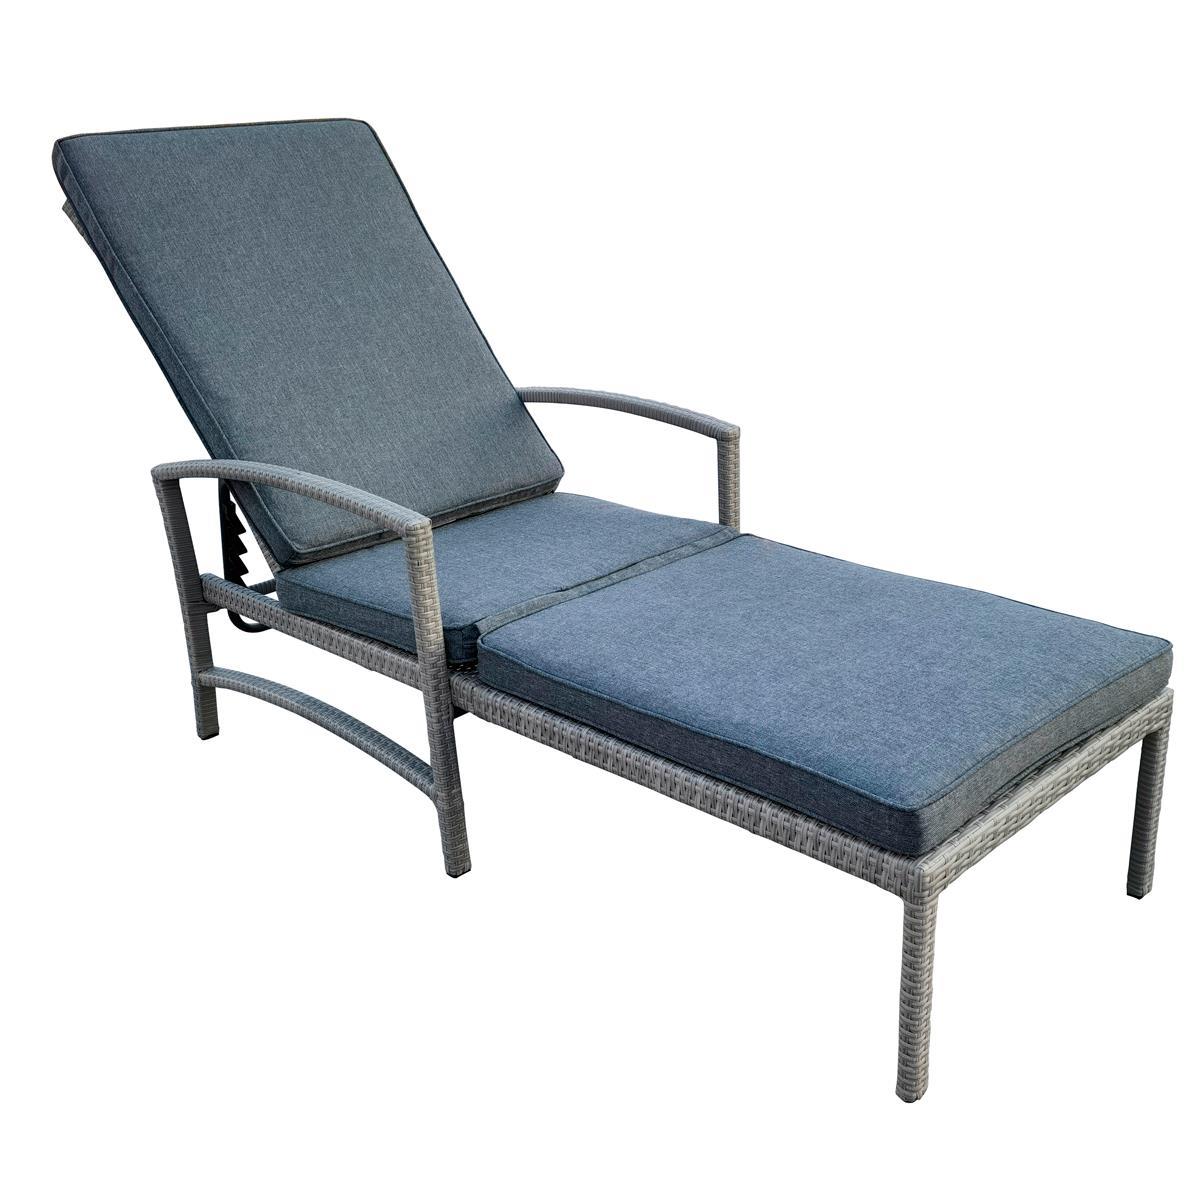 Global Note Collections Carolina Mist Chaise Lounge | Shop NFM